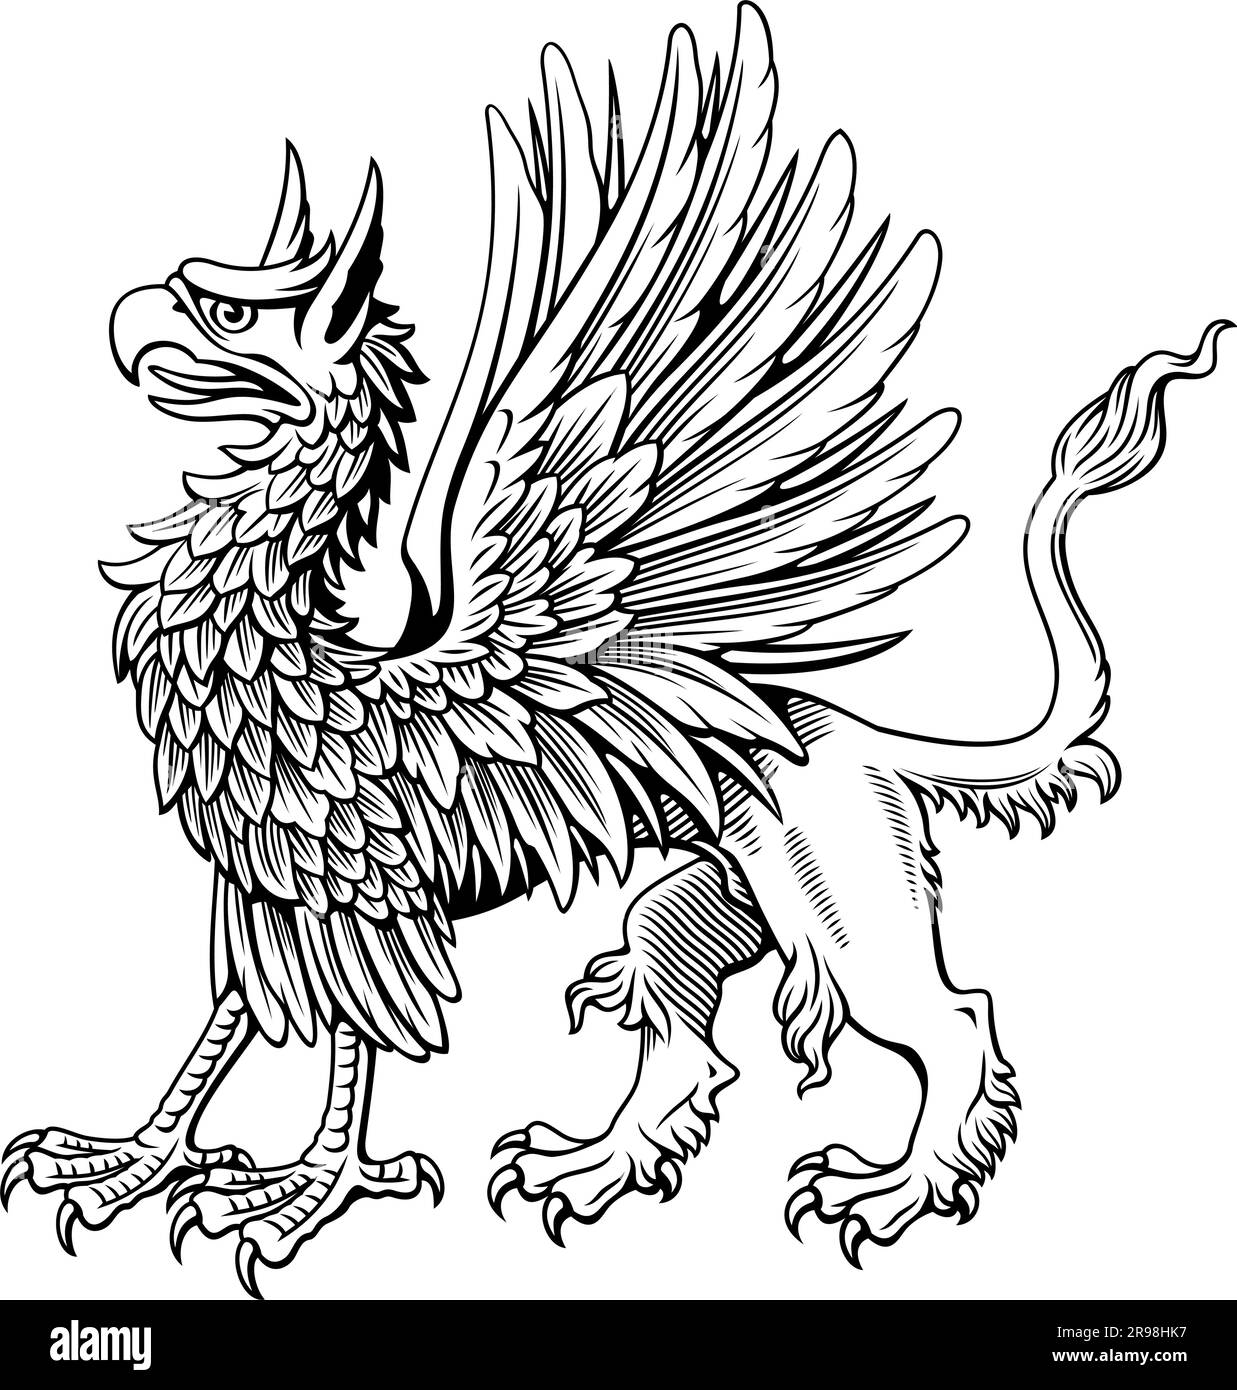 Standing Heraldic Griffin. Ink style engraving vector clipart. All white parts available for coloring. Stock Vector